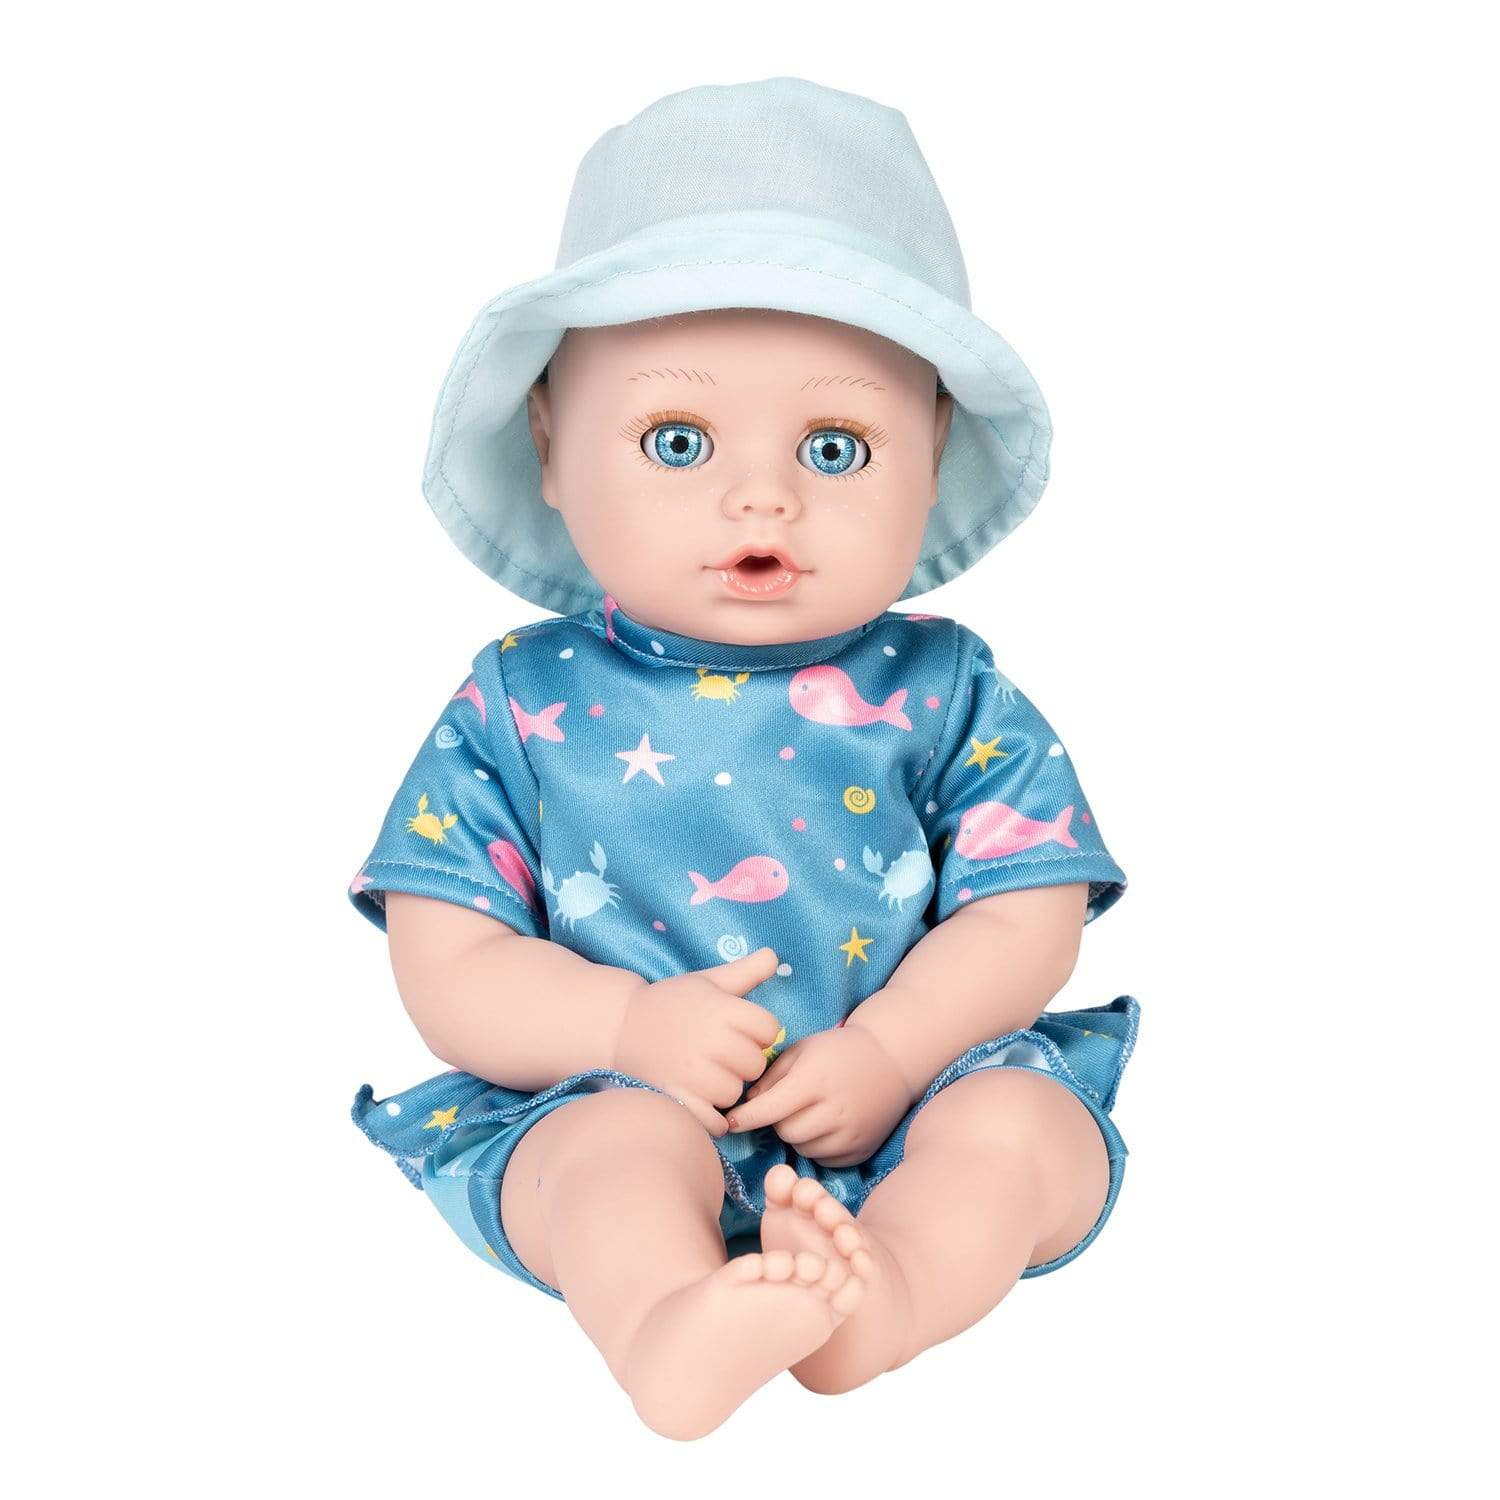 Adora Beach Baby Doll with Sun-Activated Freckles, Clothes & Accessories Set - Baby Sunny